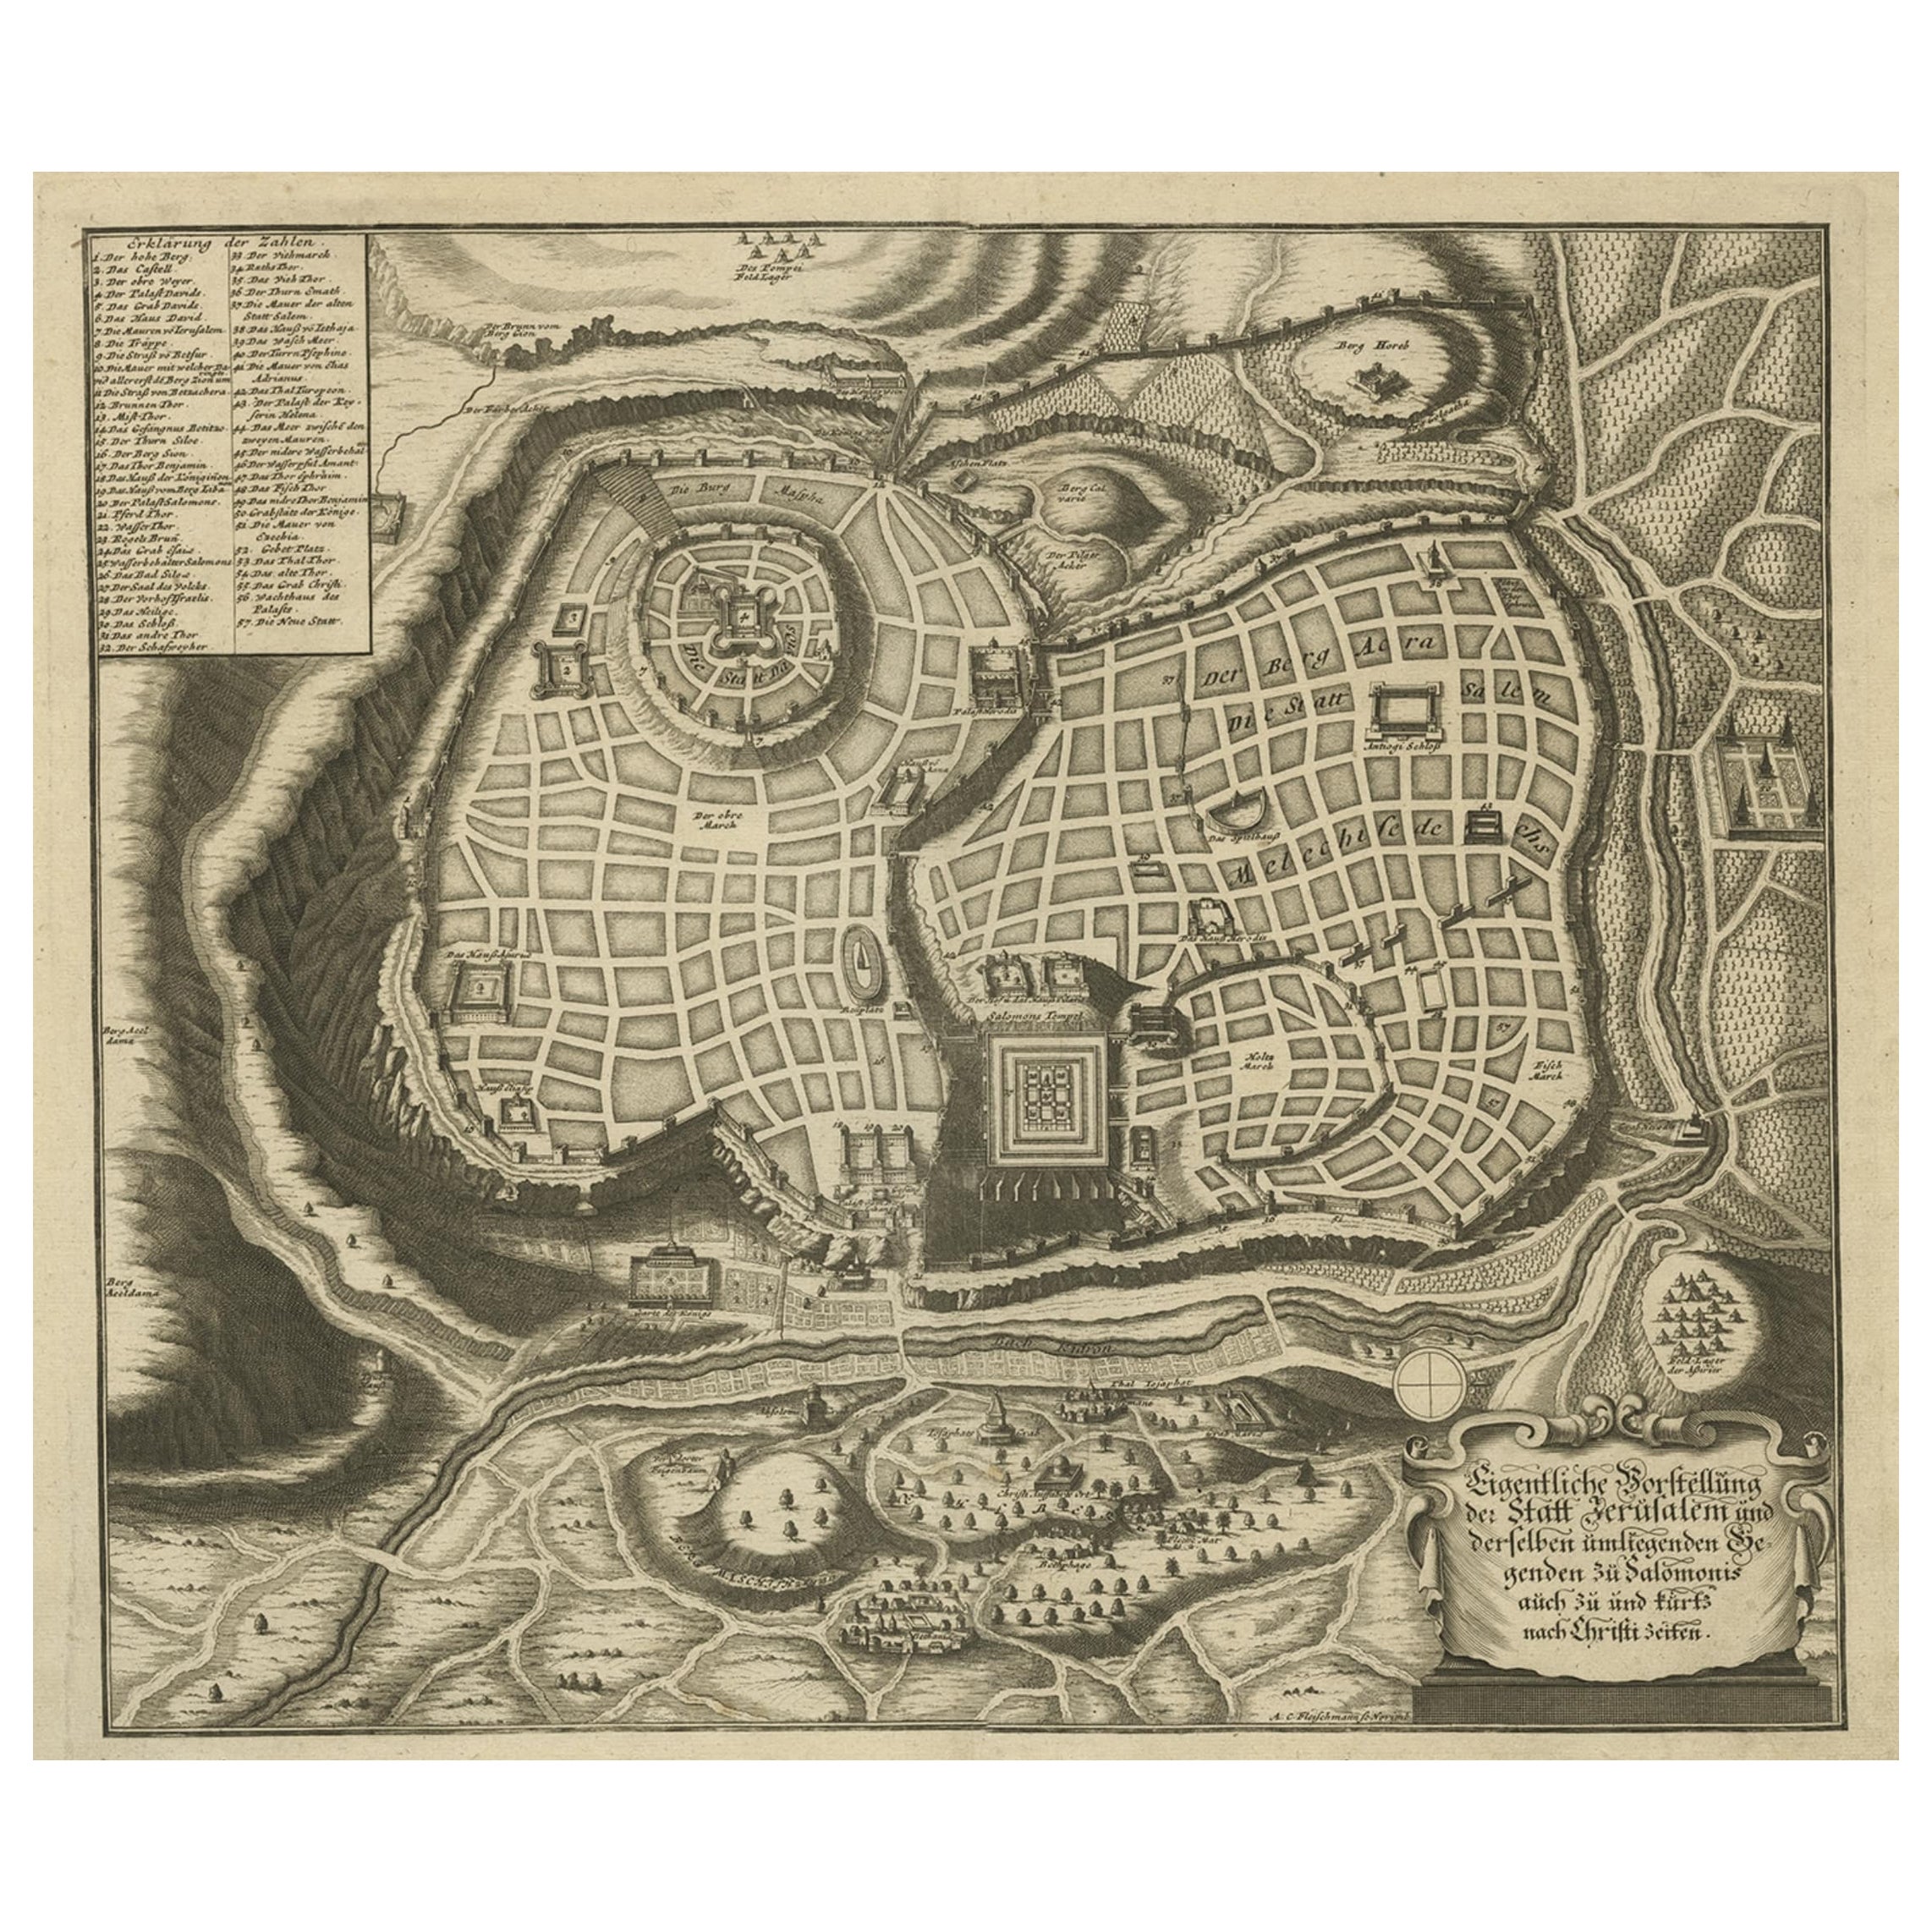 Rare Town Plan of Jerusalem, Includes an Extensive Key to Locations etc, 1708